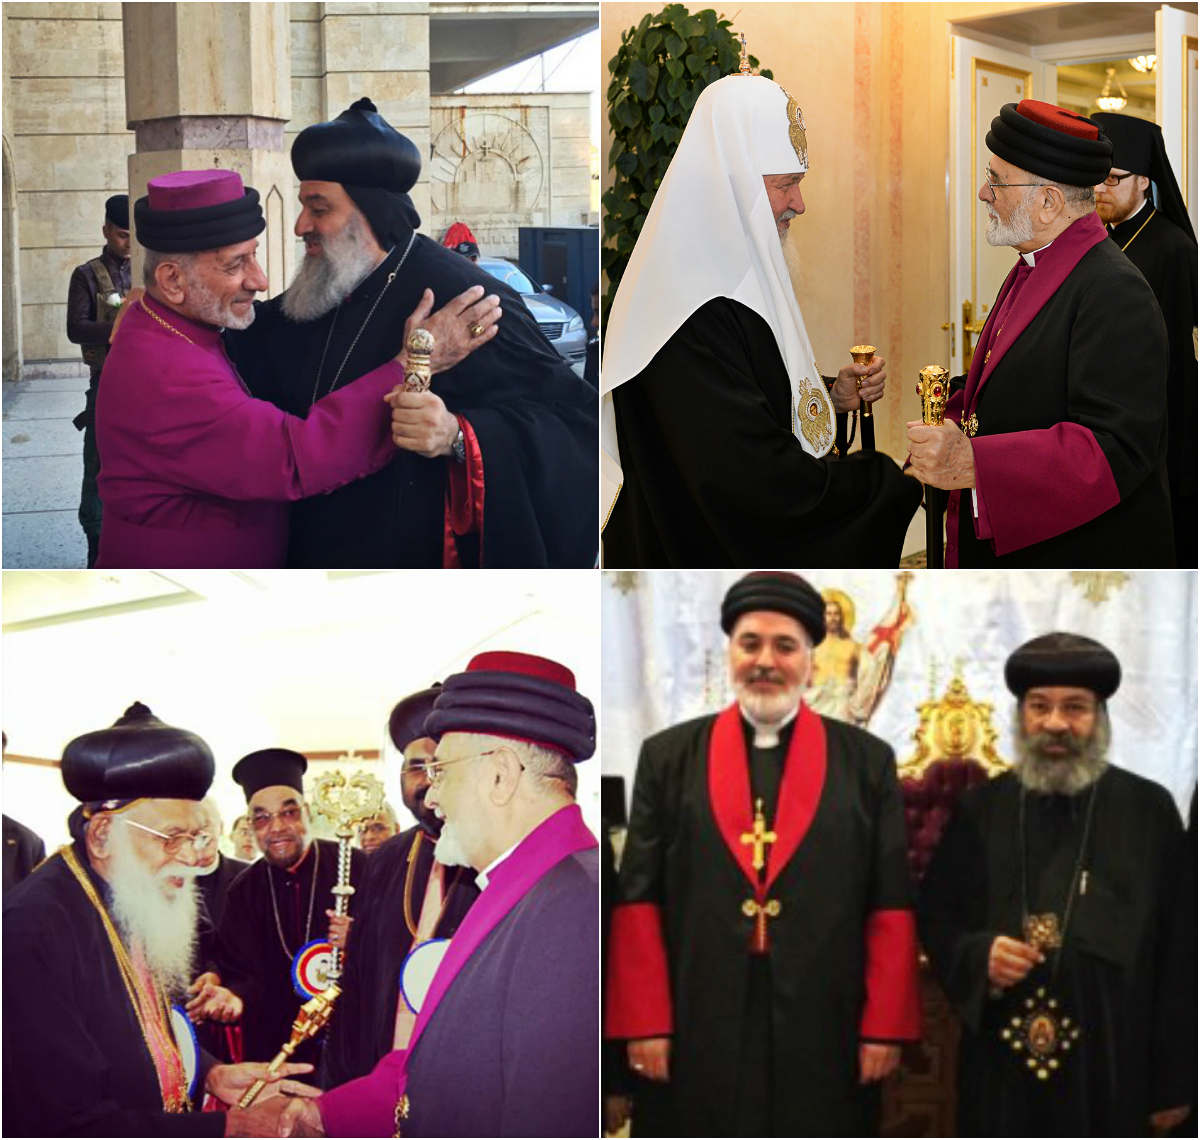 The Quest for Orthodox–Assyrian Alliance